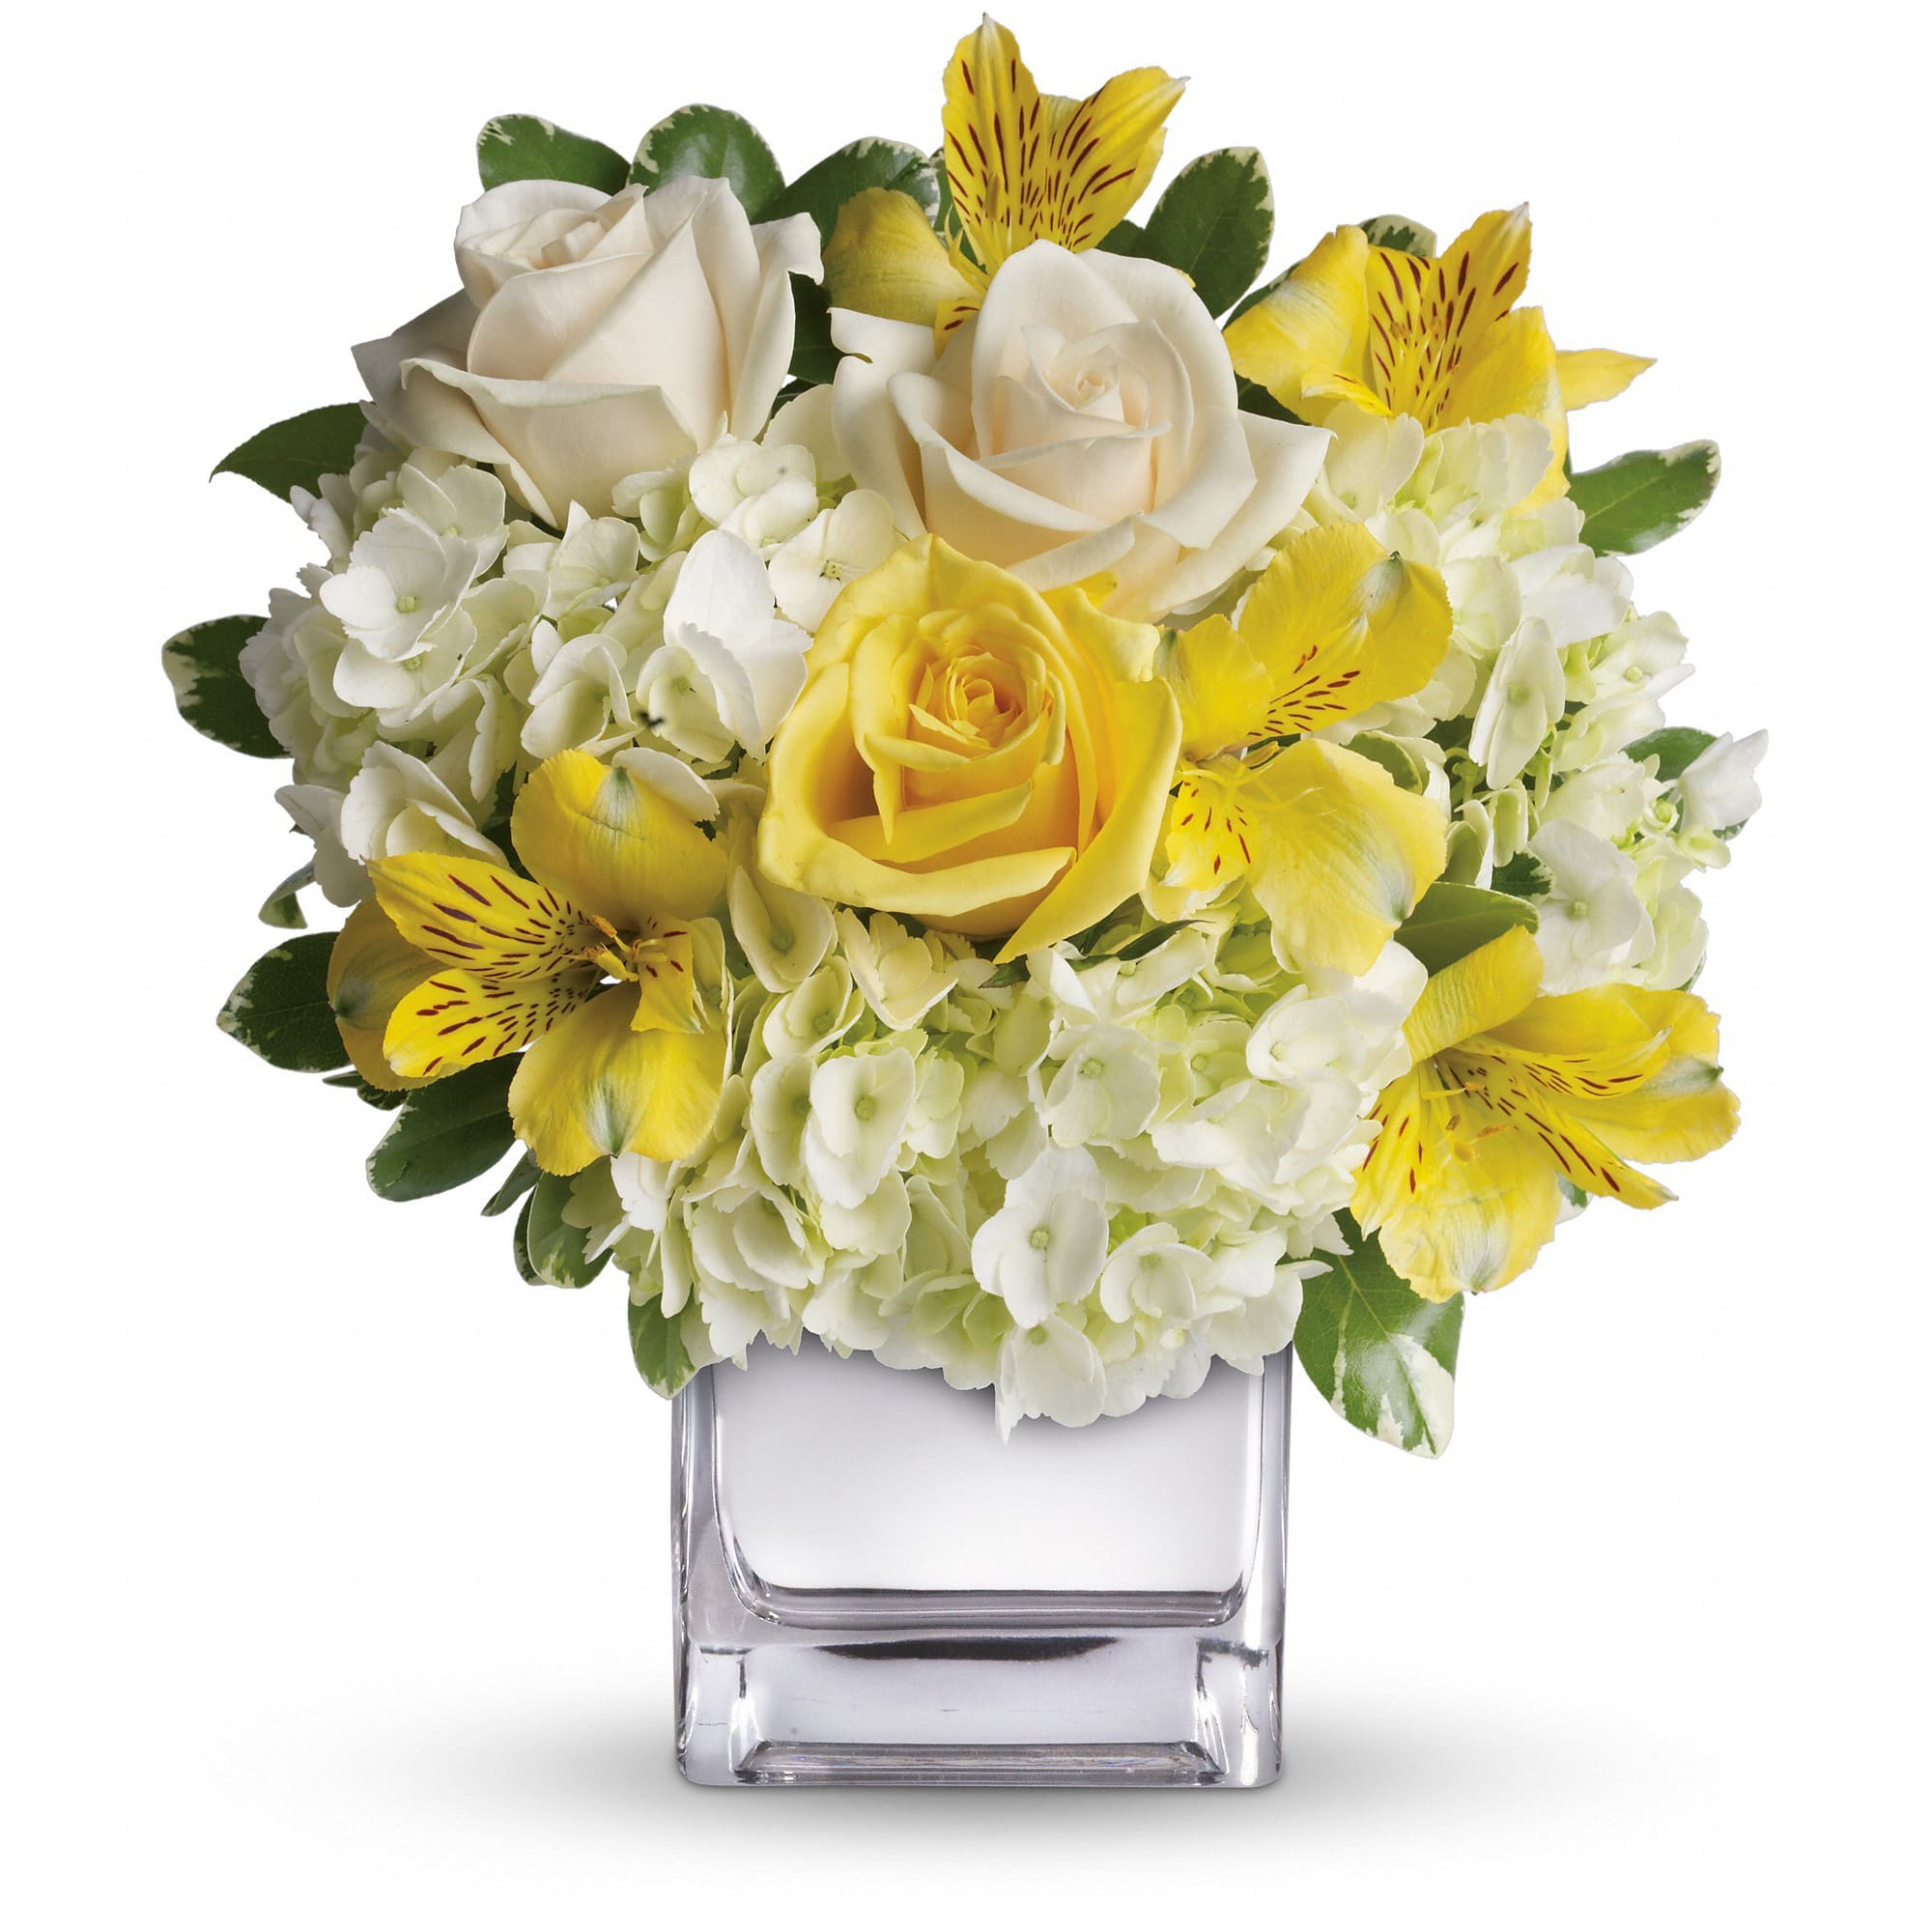 Teleflora's Sweetest Sunrise Bouquet - This sparkling array of sunny favorites in a silver cube vase will be the star of any room. It's a sweet gift she'll love to receive - and you'll be proud to give. Sweet price, too.  